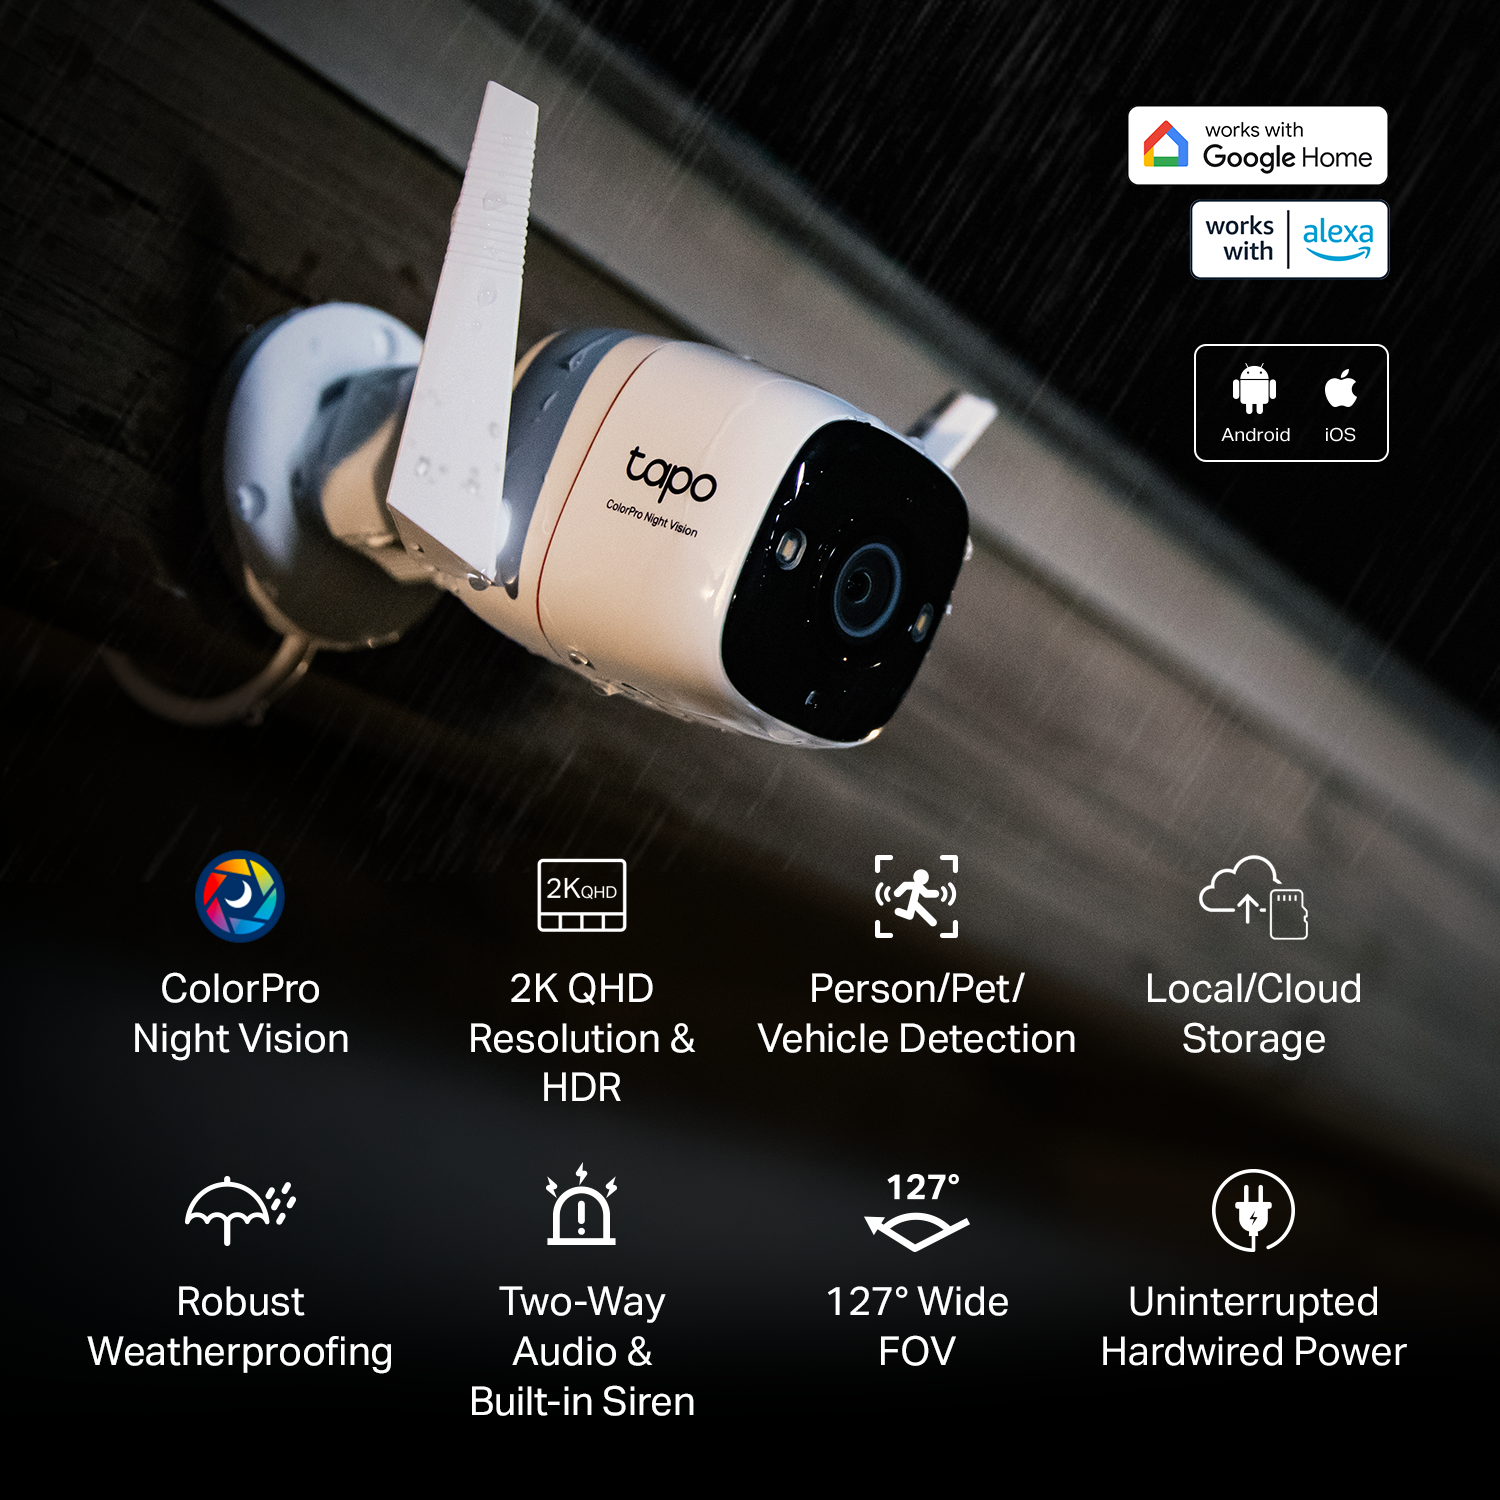 TP-Link Tapo 2K QHD Pan/Tilt Wi-Fi Camera | Physical Privacy Mode | Color  Night Vision | AI Detection | Motion Tracking | 2-Way Audio | Local/Cloud